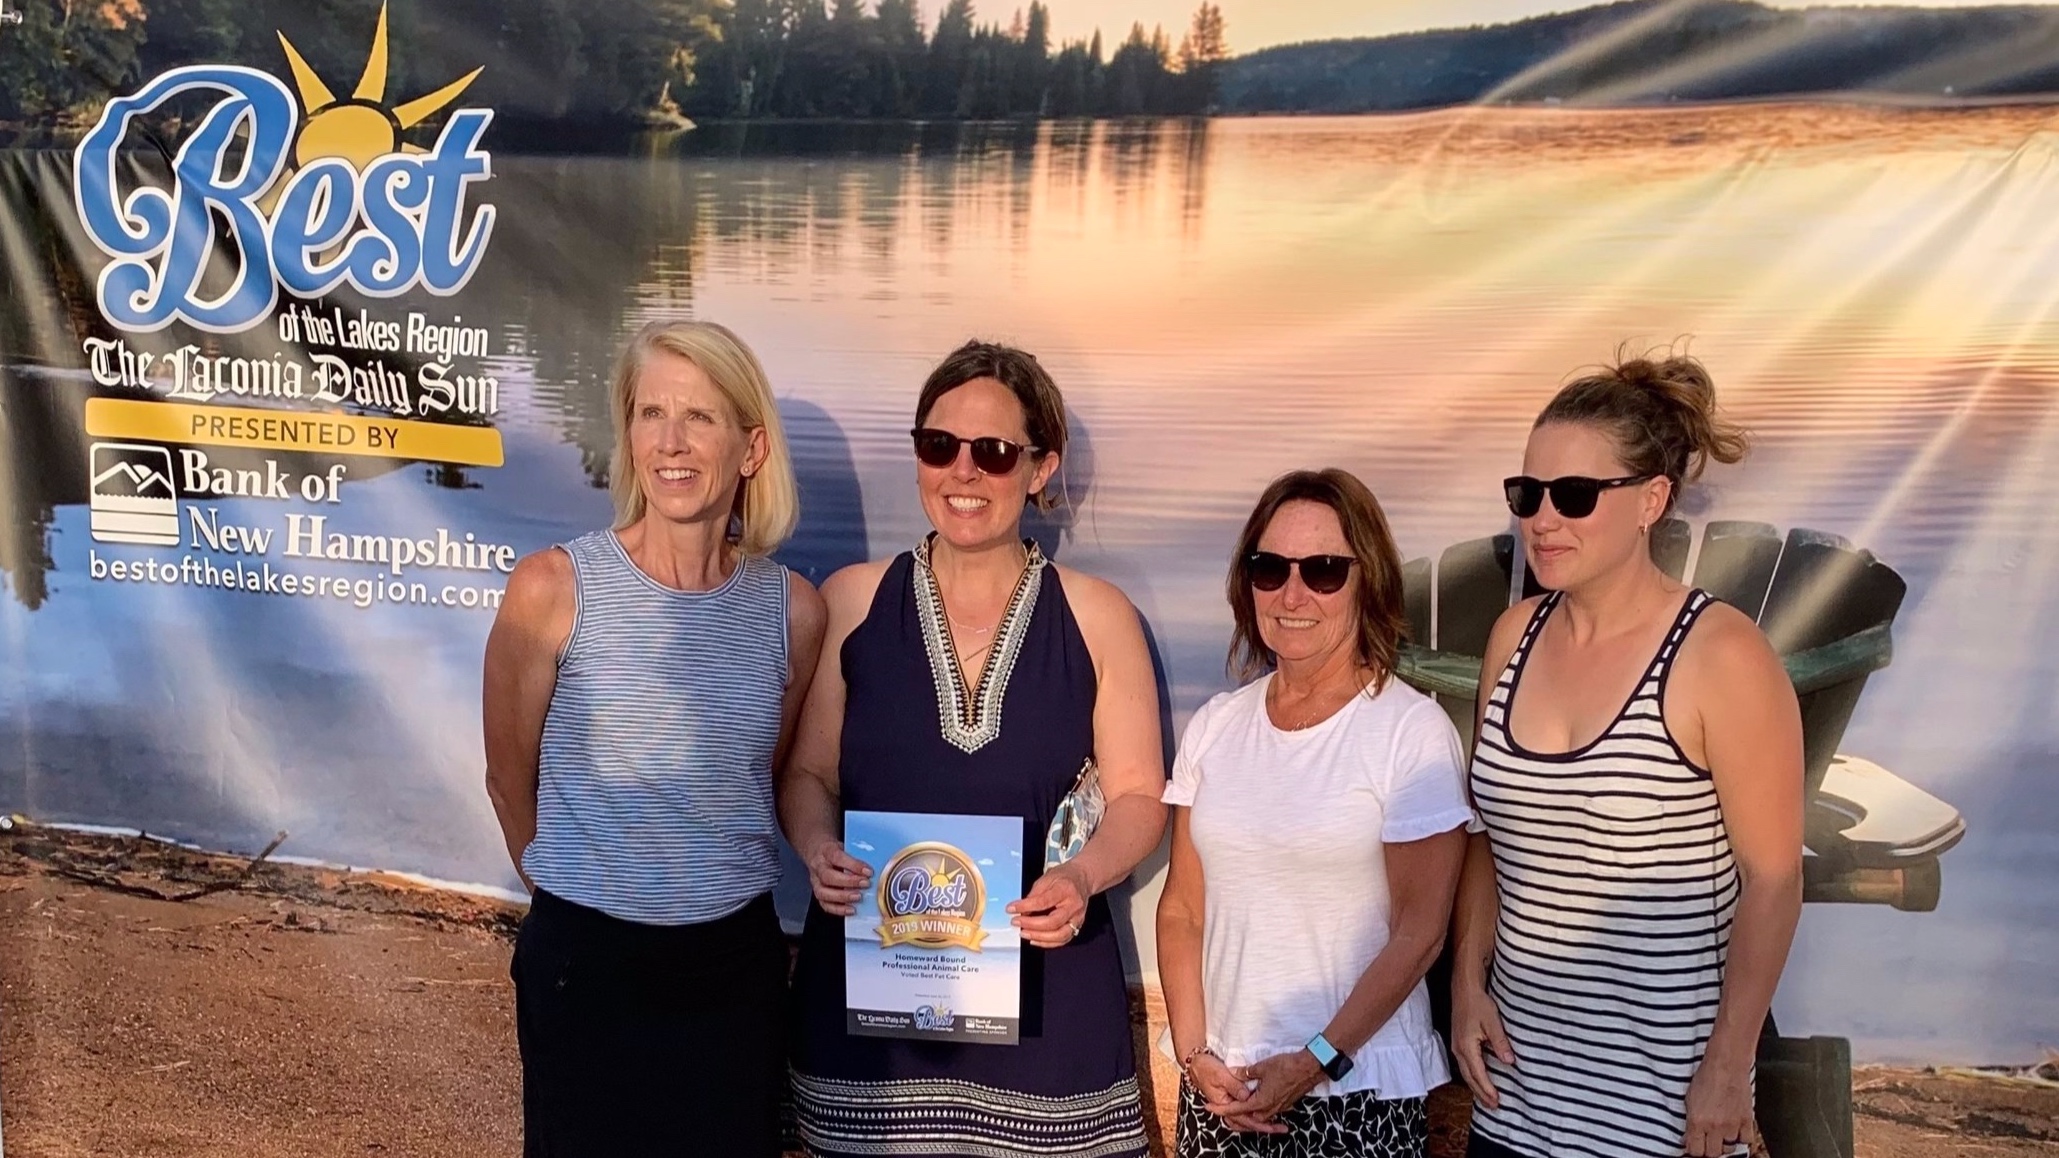 Homeward Bound employees, along with owner Alix, accept Best of the Lakes Region Award at the Best of the Lakes Region Beach Party. From L to R: Jane, Alix, Lee, and Emily.